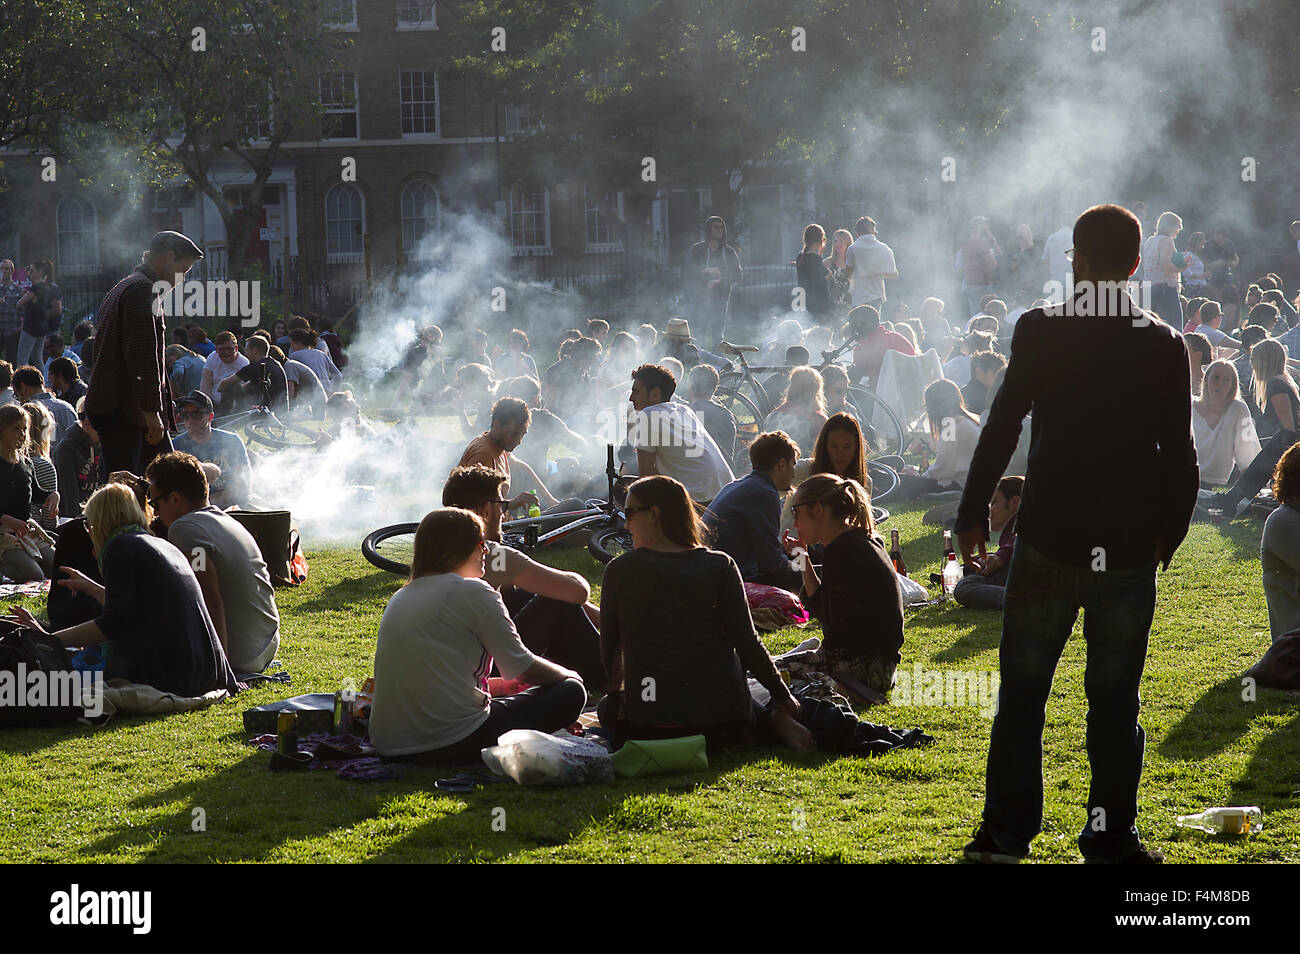 Large group of people in London Fields park on a sunny day, sitting on the grass, barbecuing, clouds of smoke rising Stock Photo